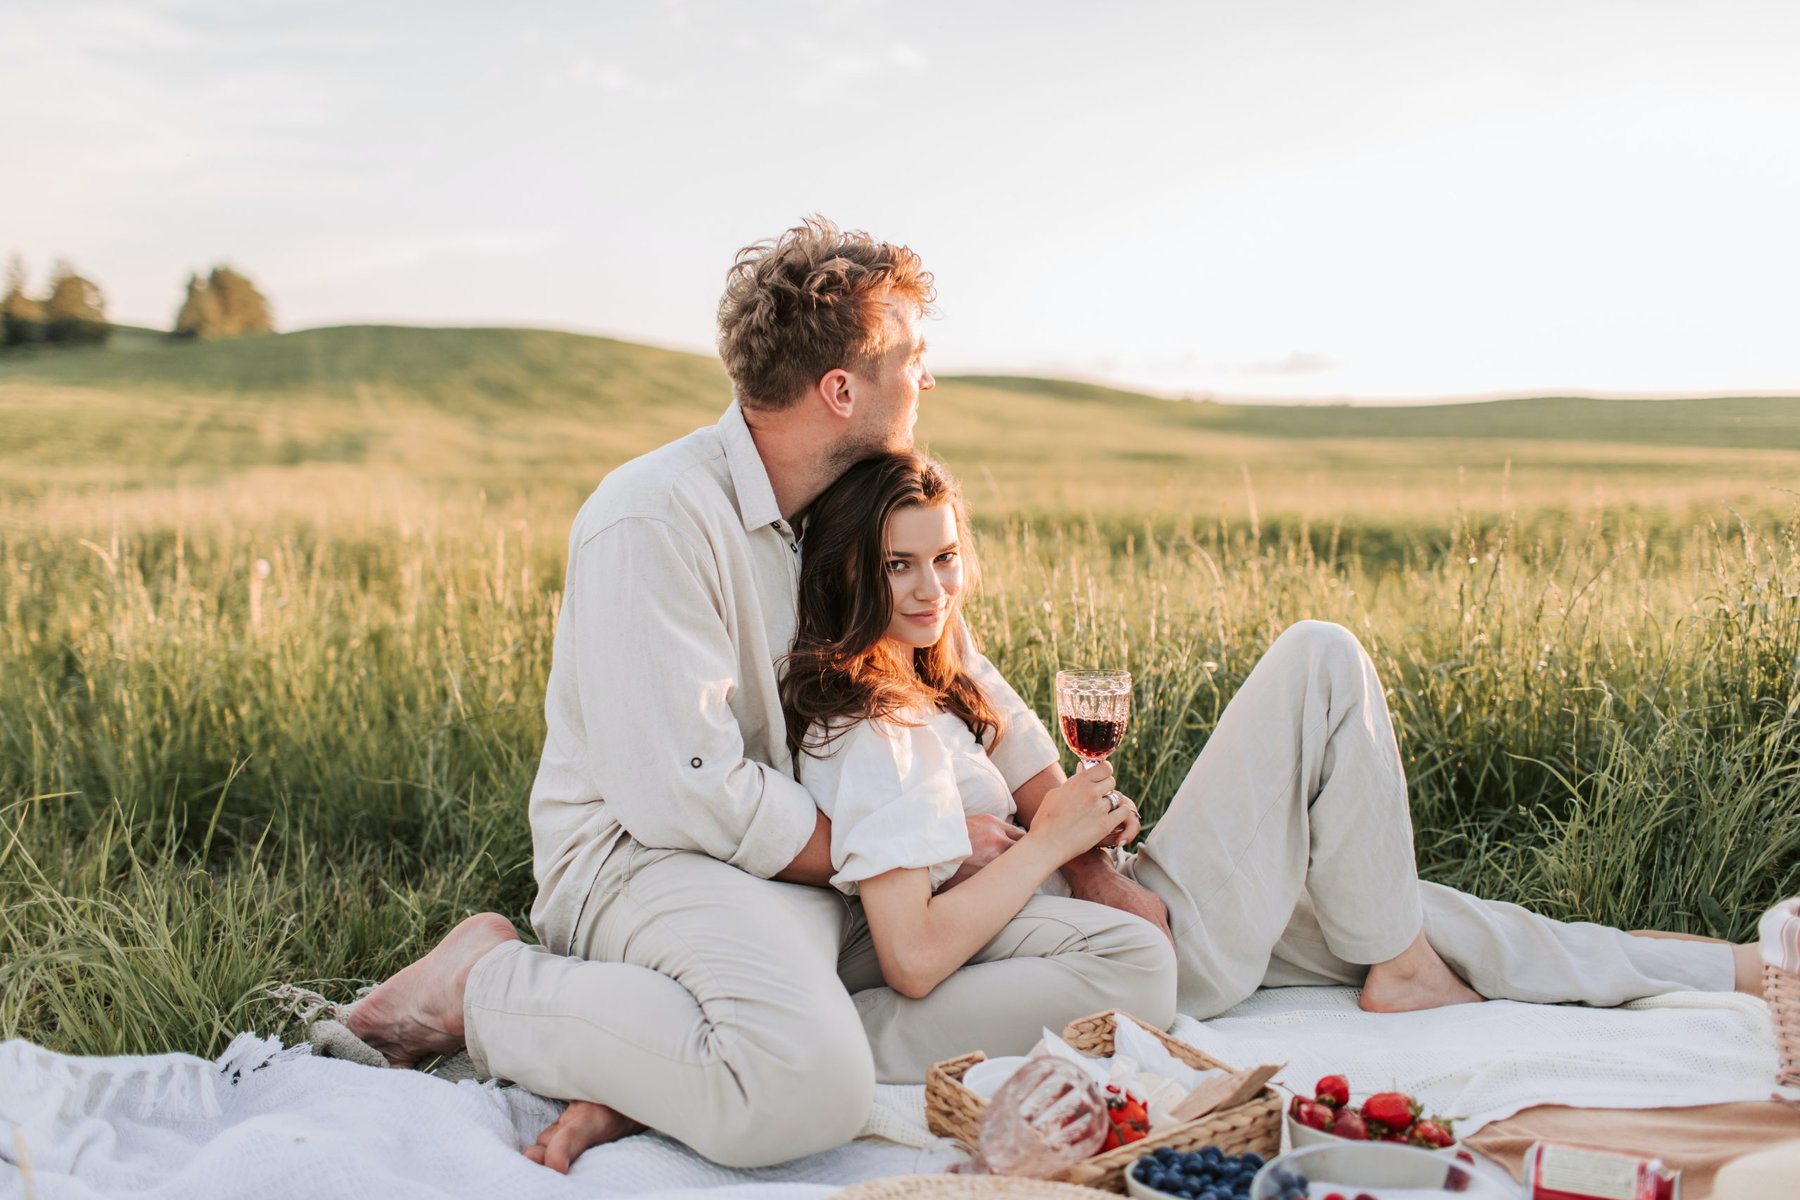 What to Pack for a Picnic Date - Don't Just Fly